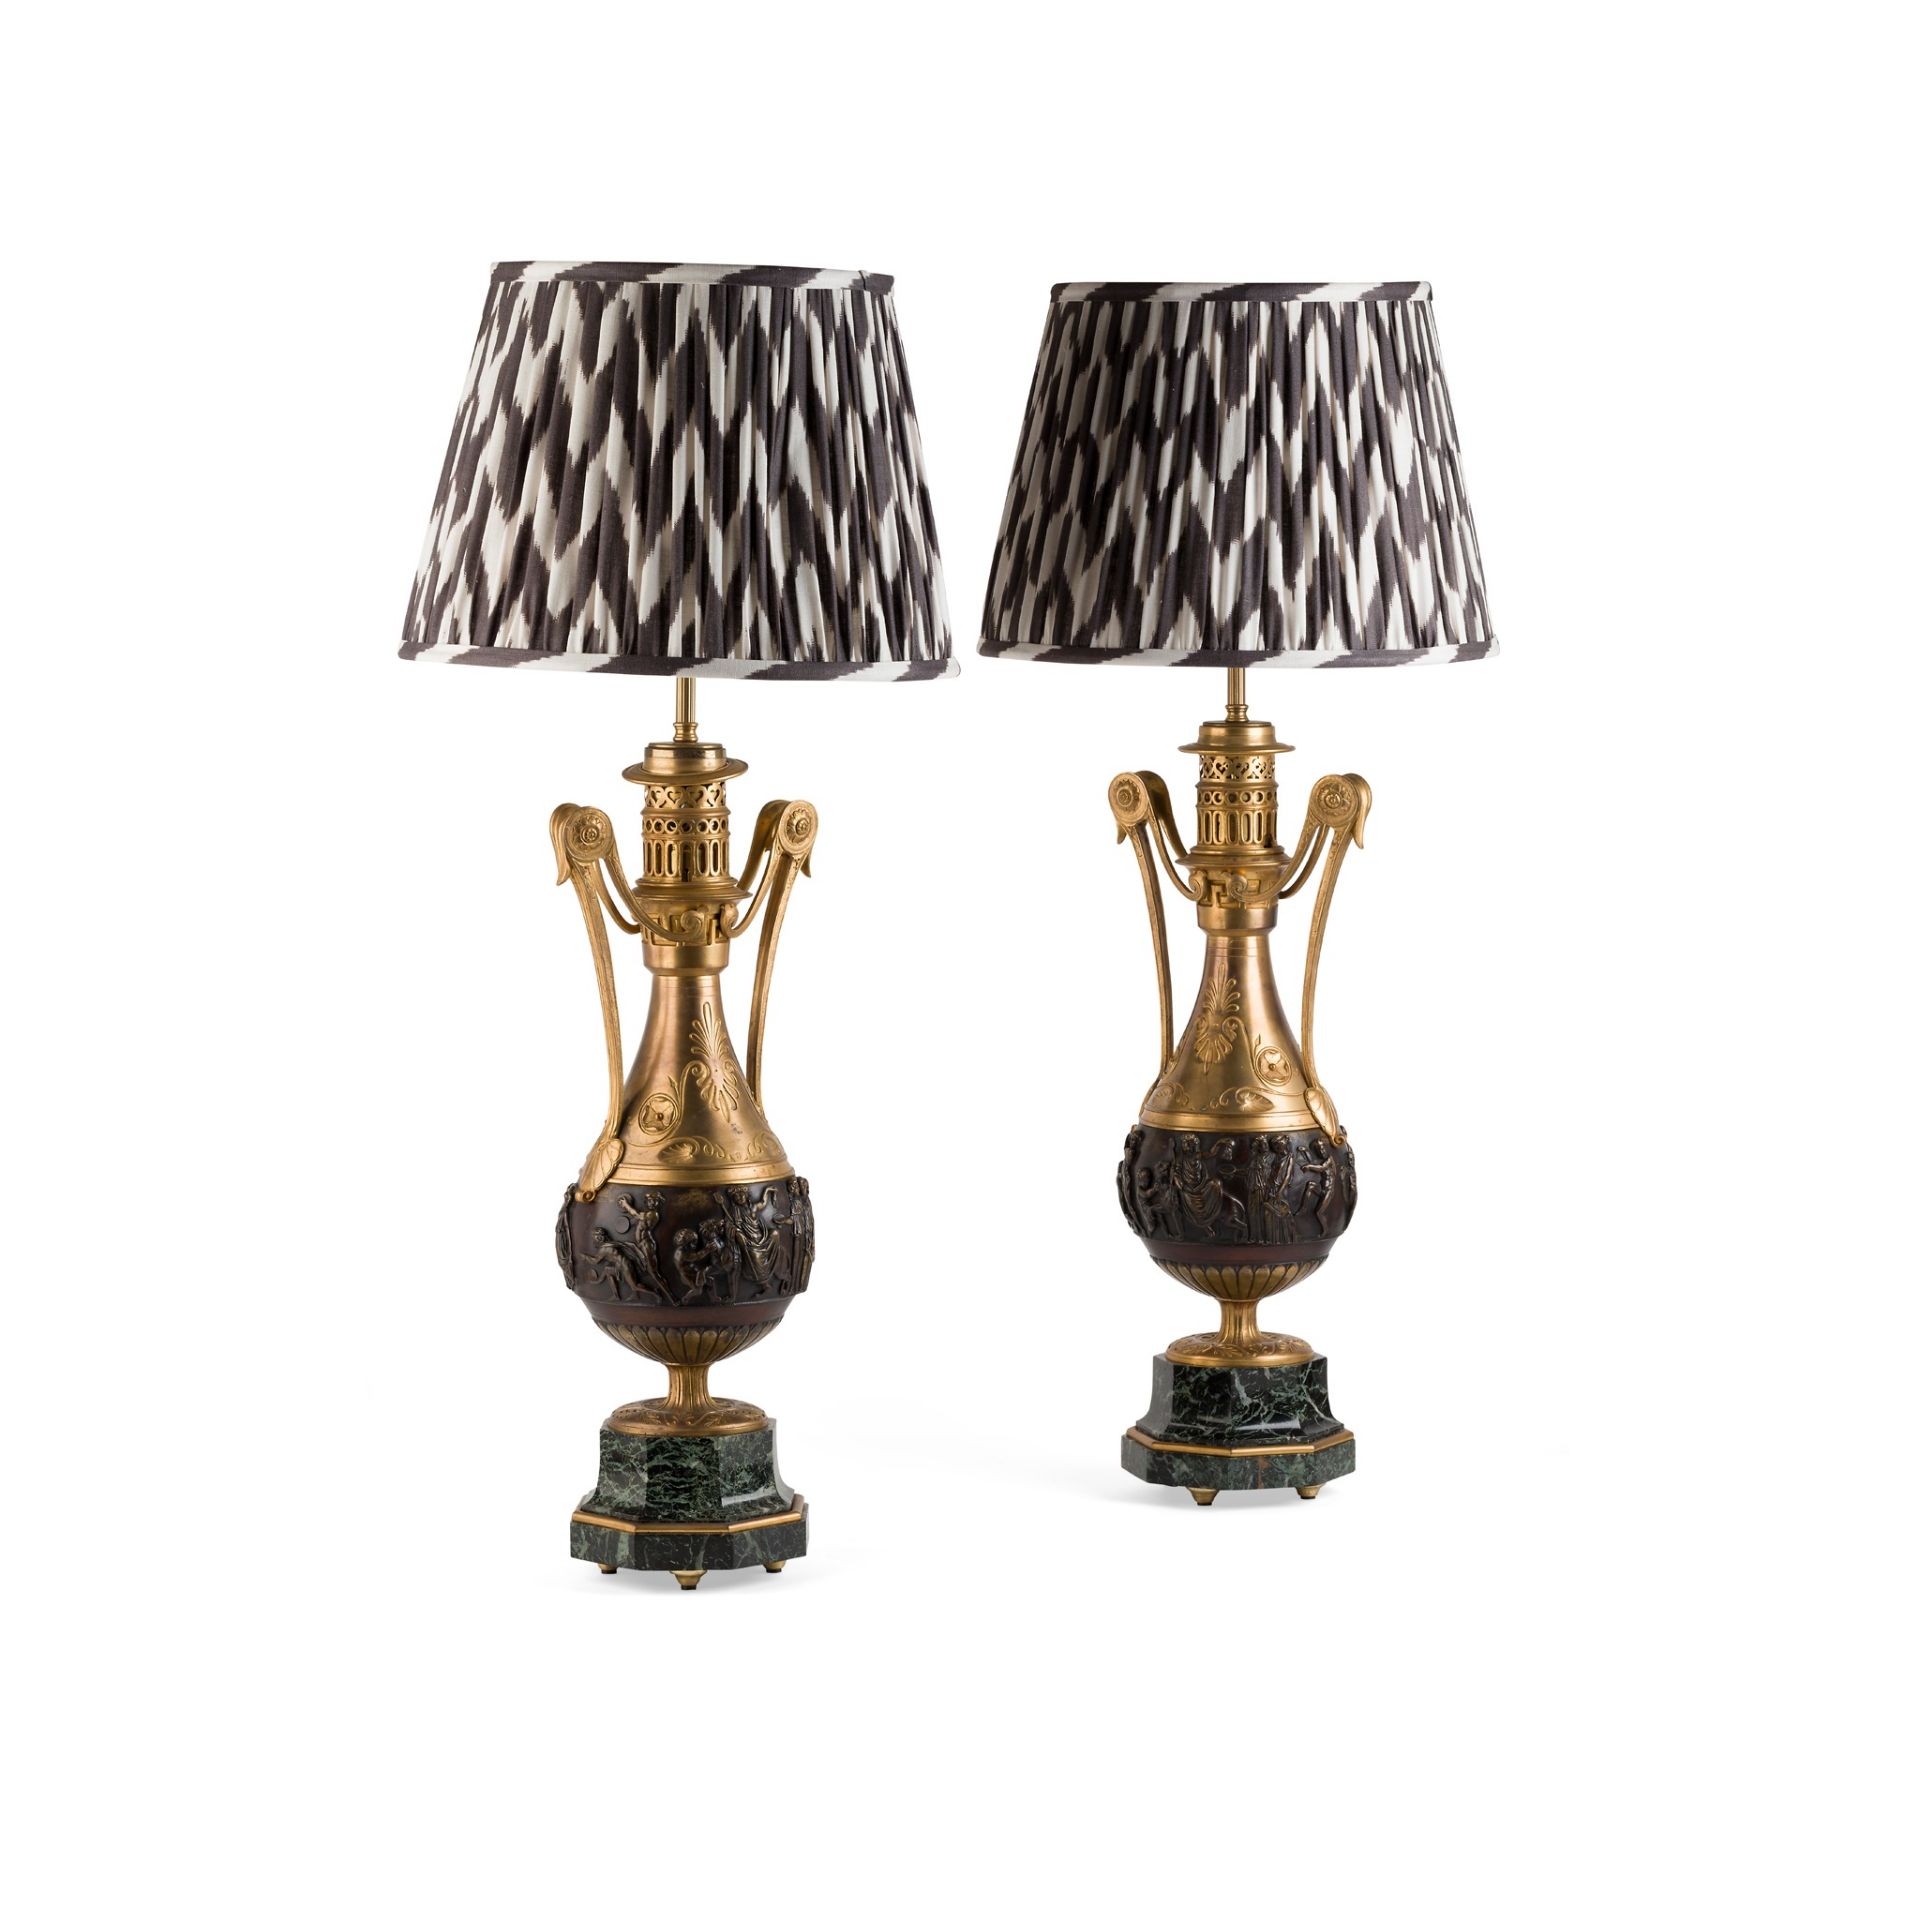 PAIR OF FRENCH GILT AND PATINATED METAL LAMP BASES 19TH CENTURY